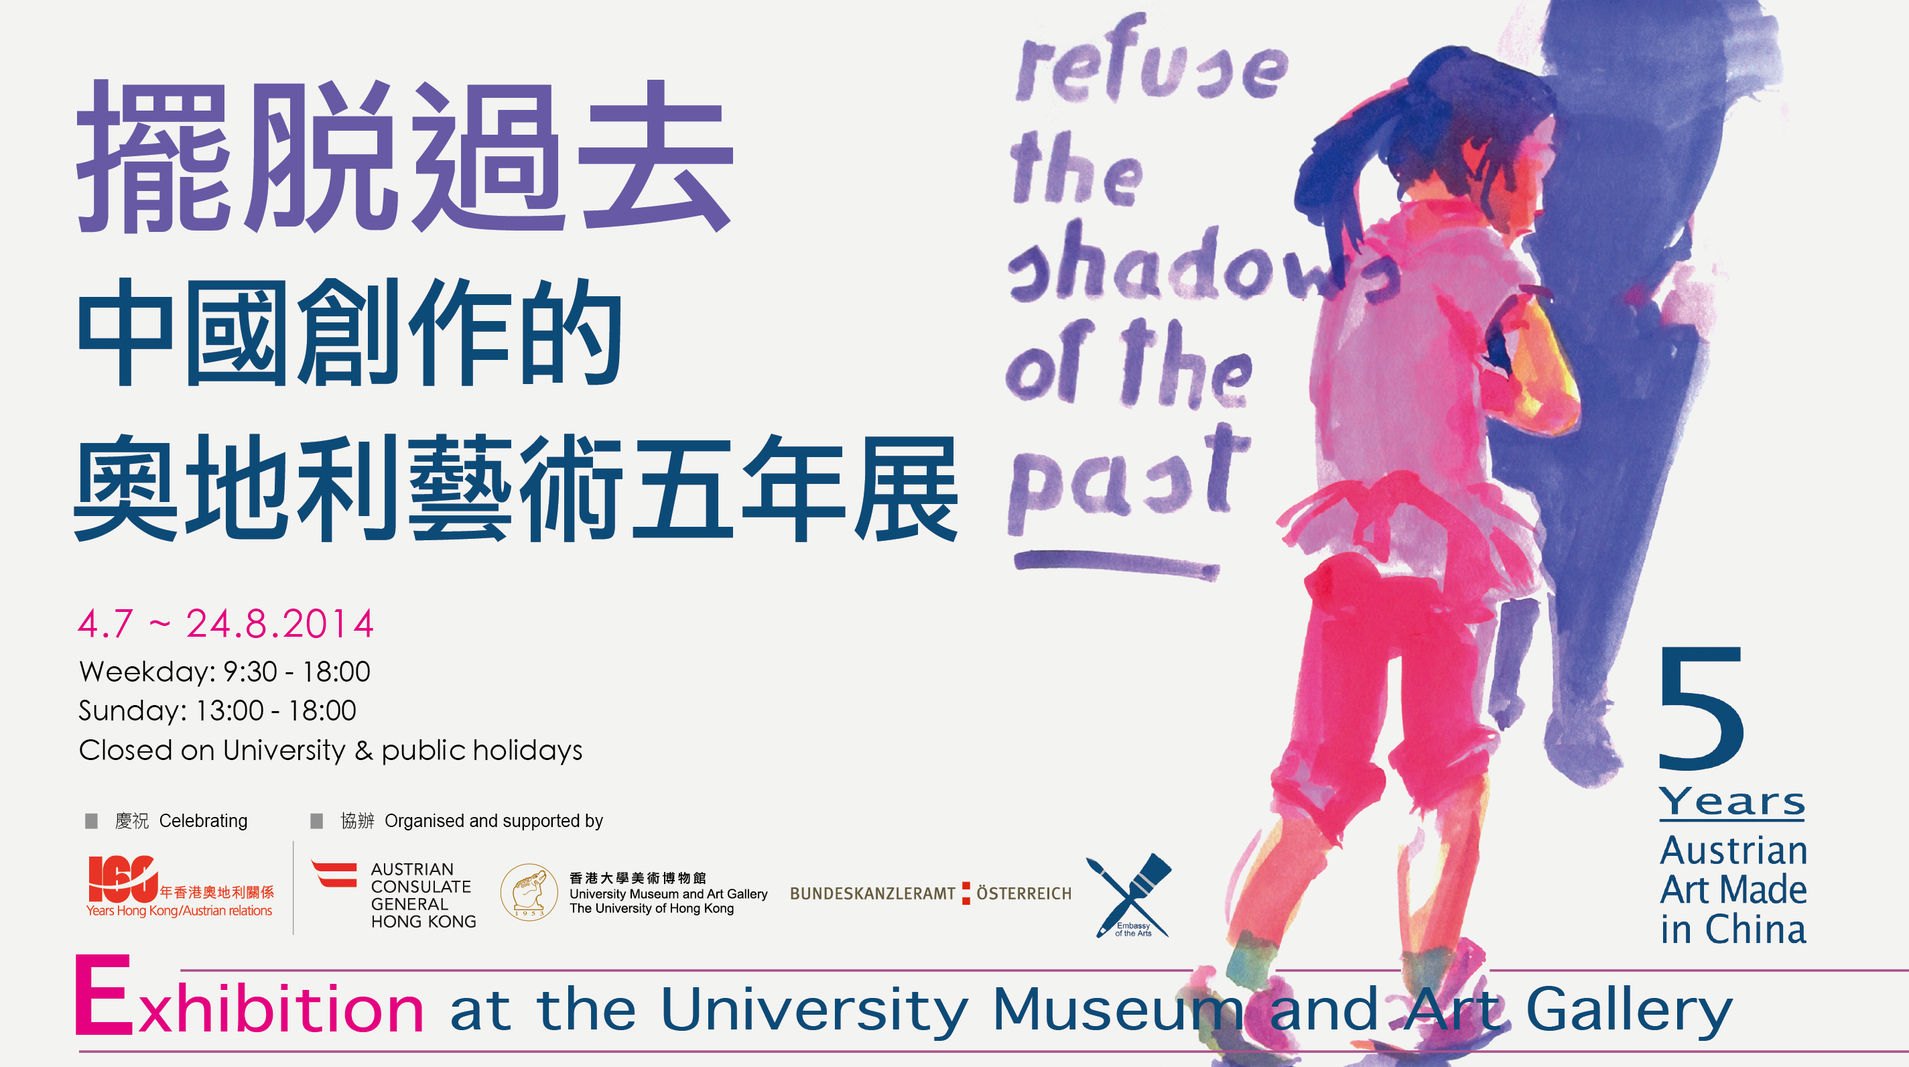 Refuse the Shadows of the Past: 5 Years Austrian Art Made in China